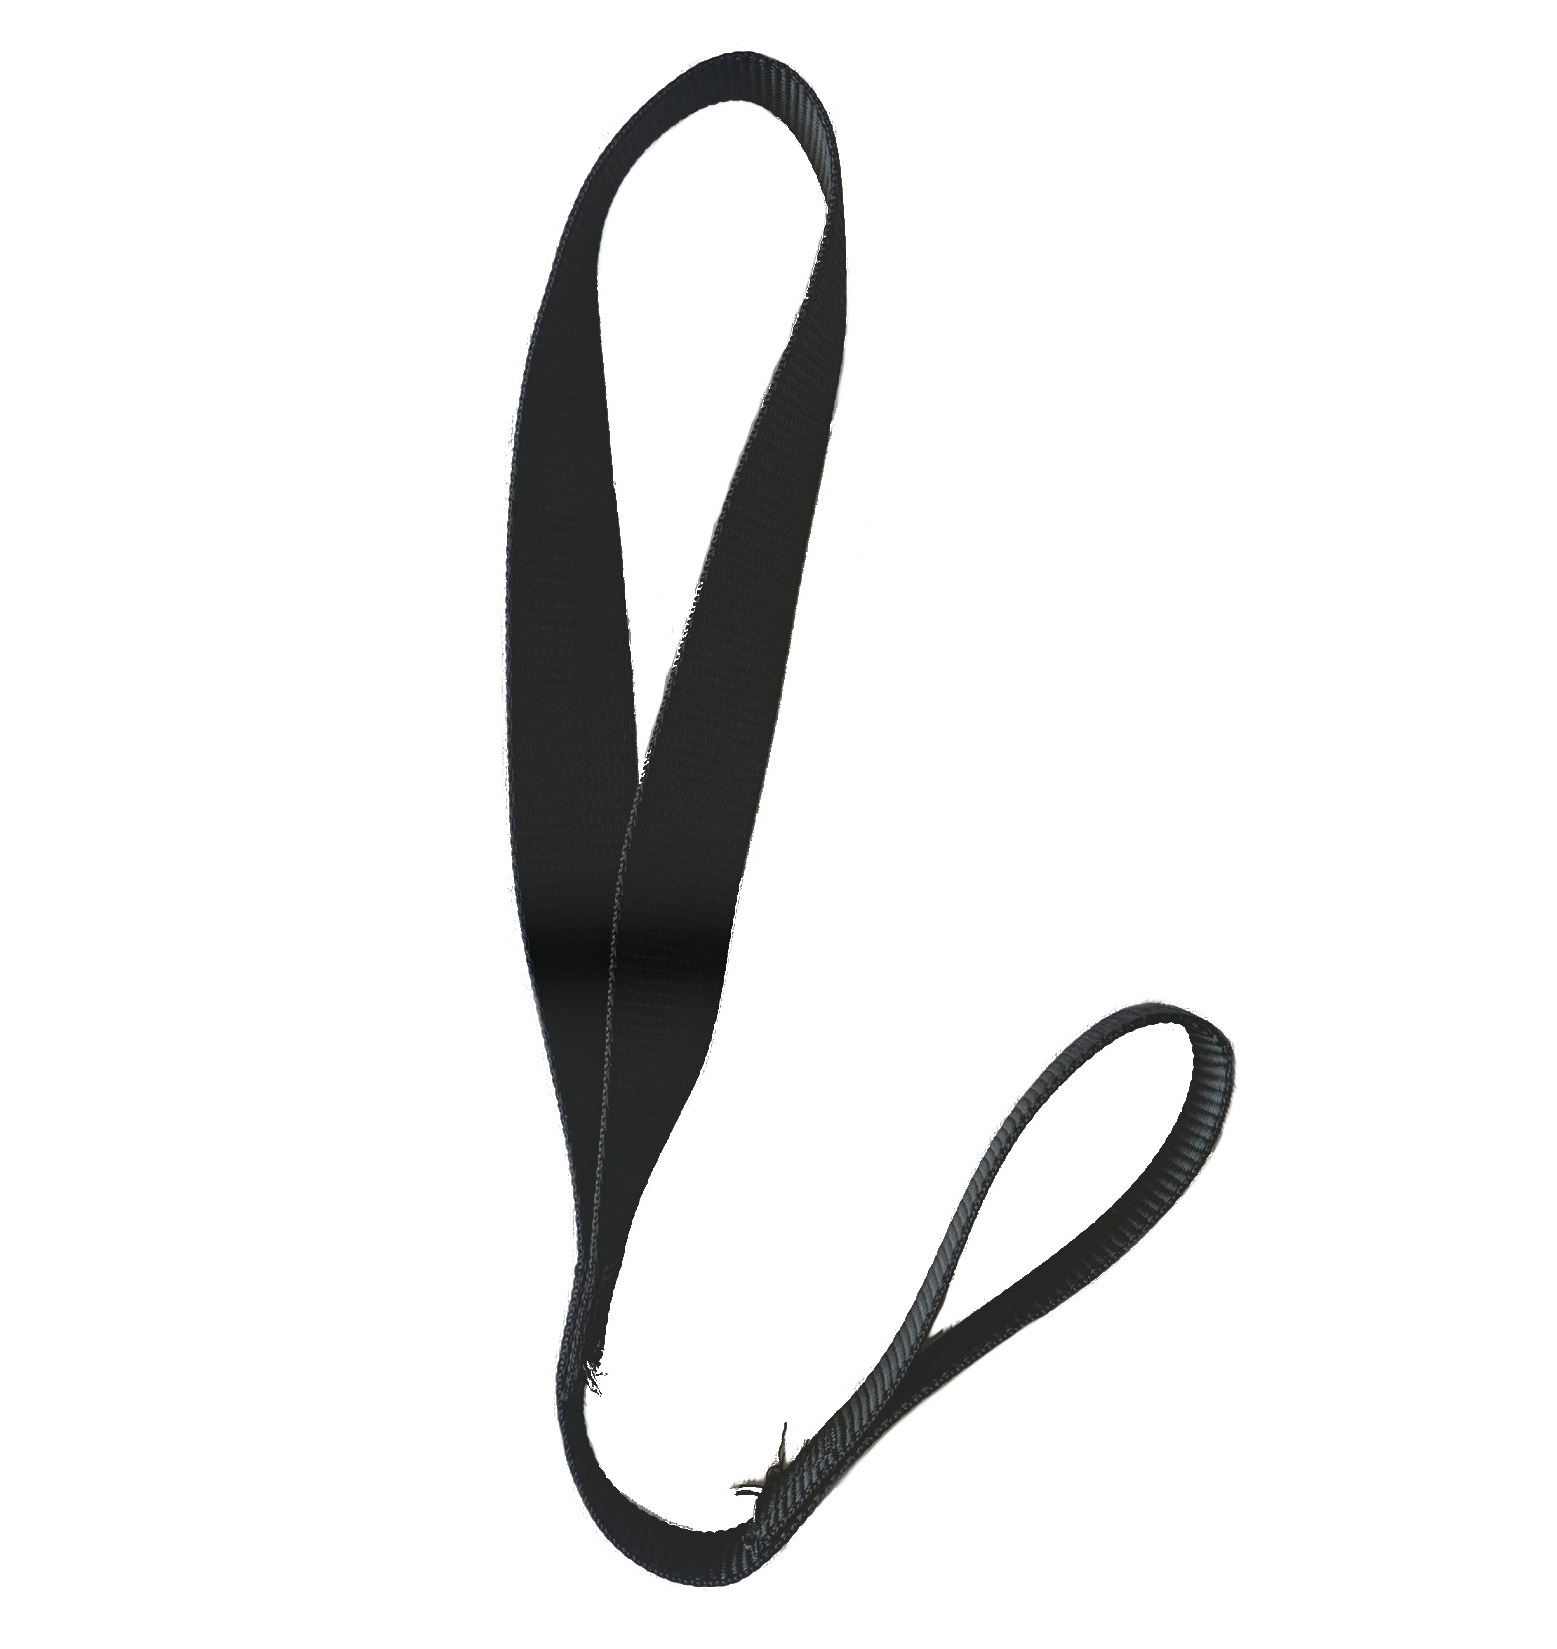 Strapworks BART Personal Hand Strap